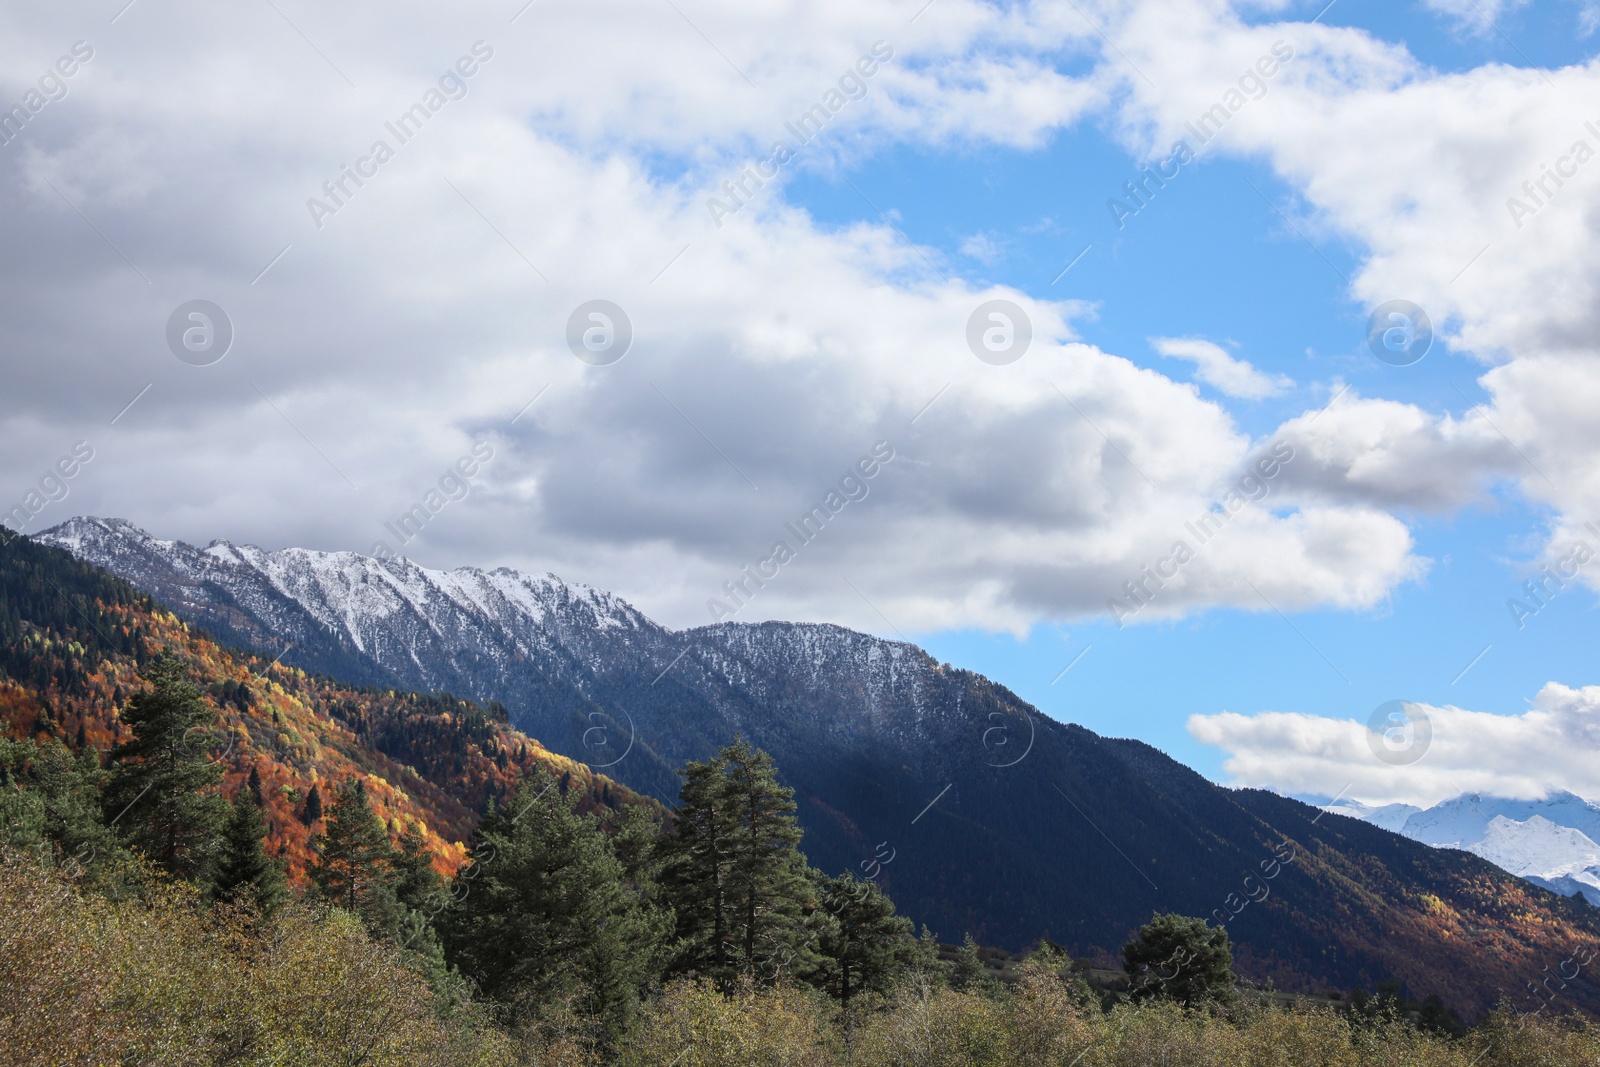 Photo of Picturesque view of mountain landscape with forest under cloudy sky